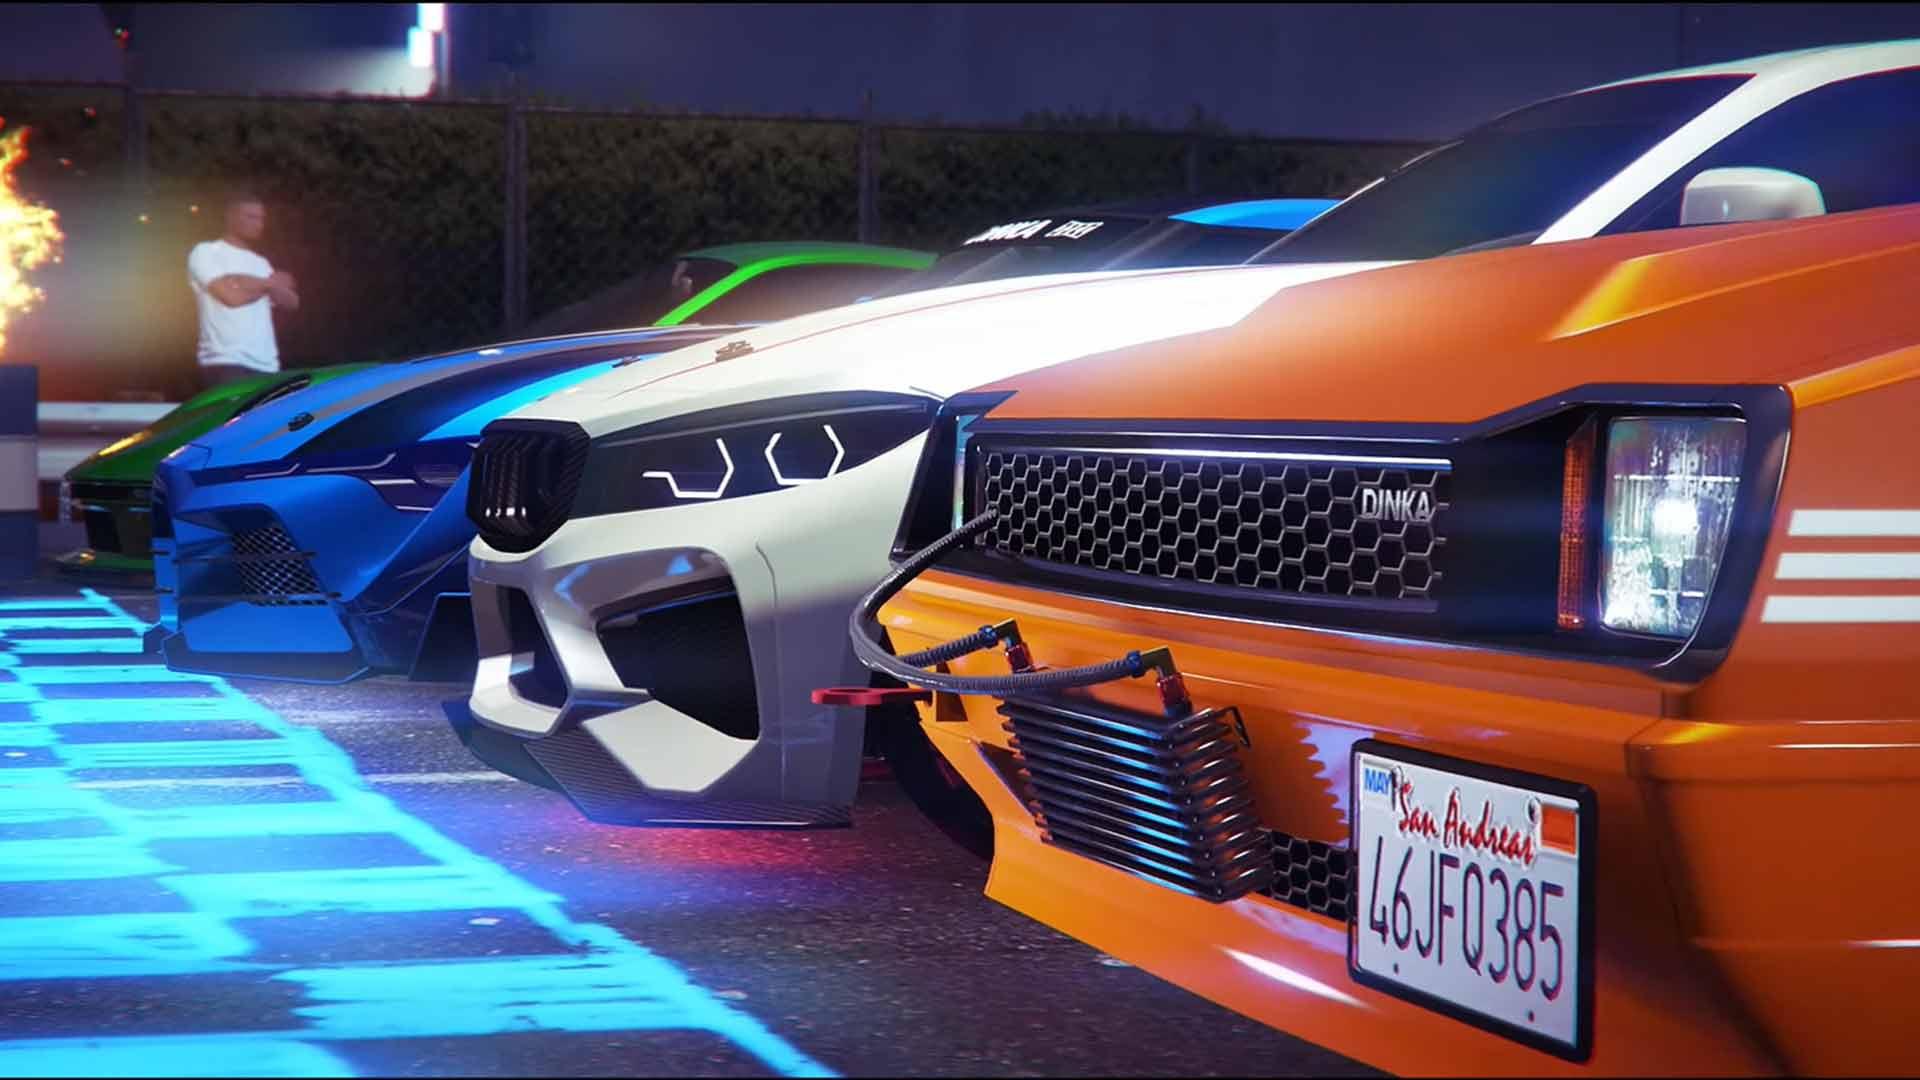 You can now finally change gears and drag race yourself in GTA 5